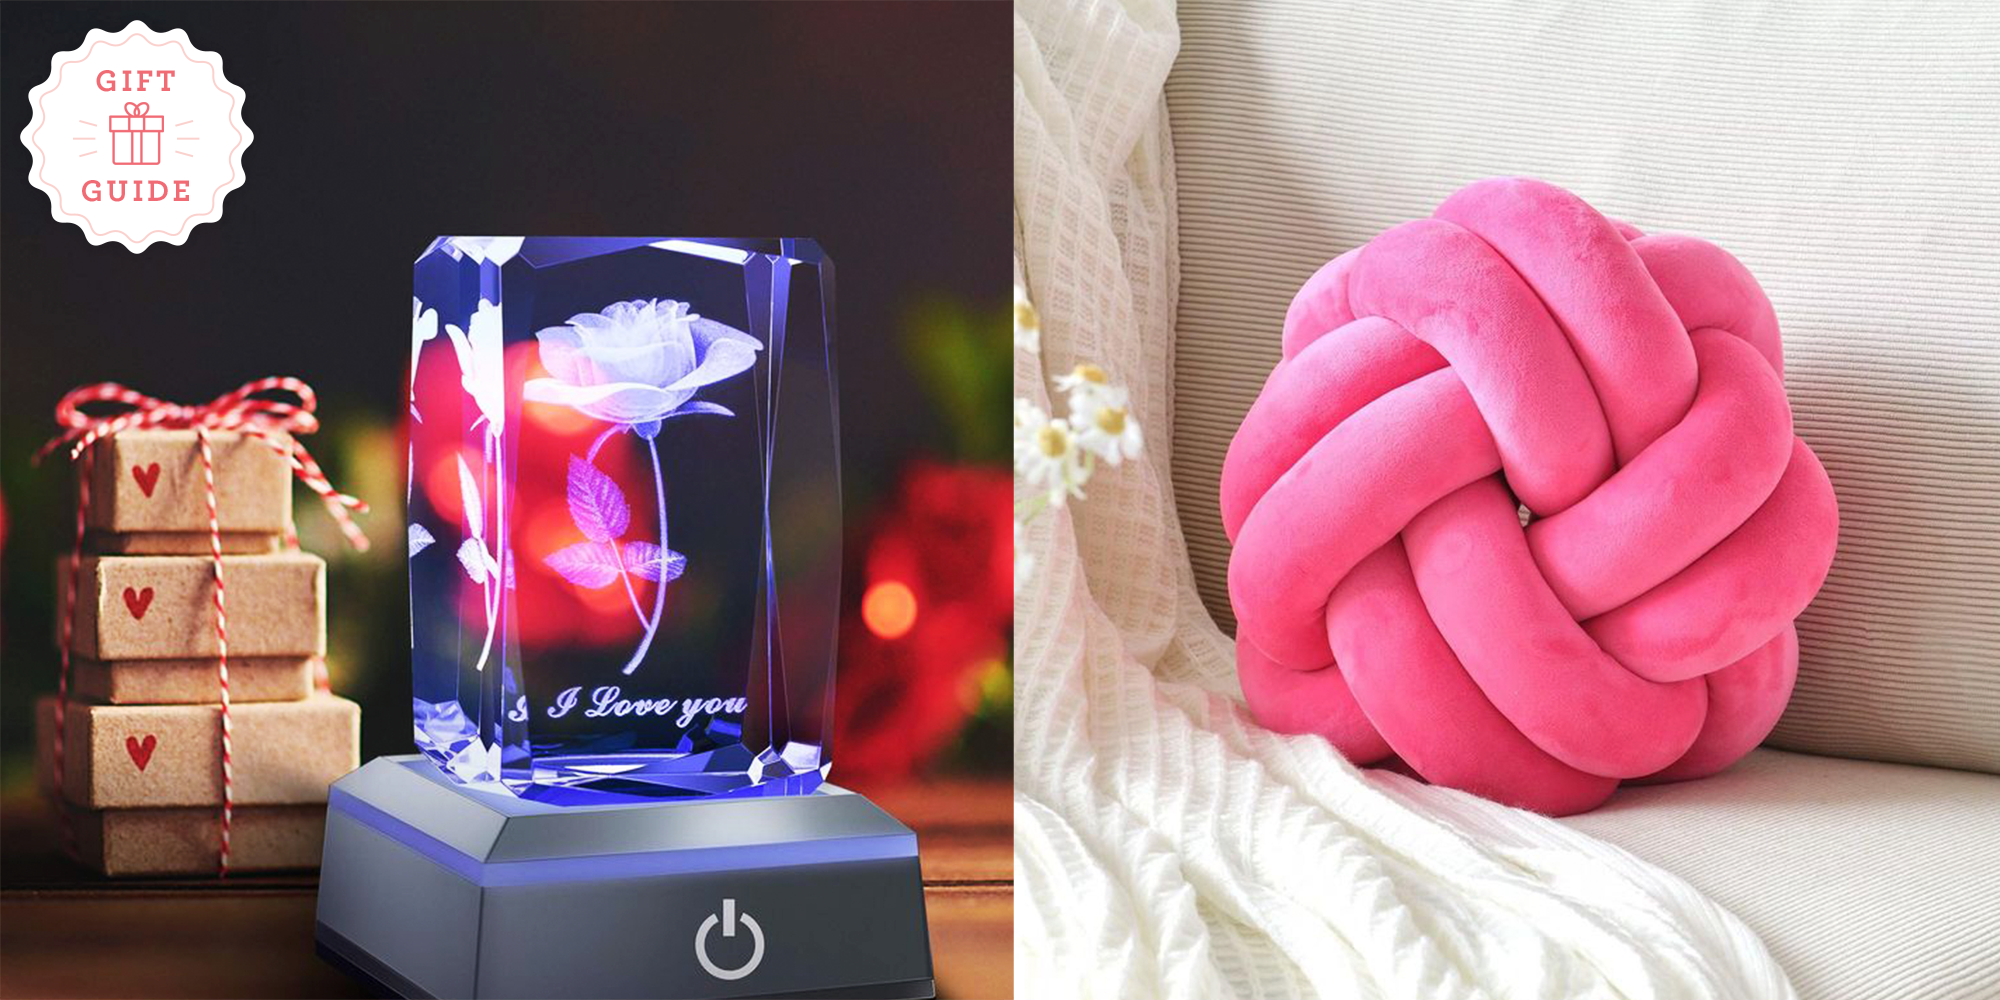 Happy Valentines Day gifts for husband: 5 tech gift ideas to make his day  special | Tech News